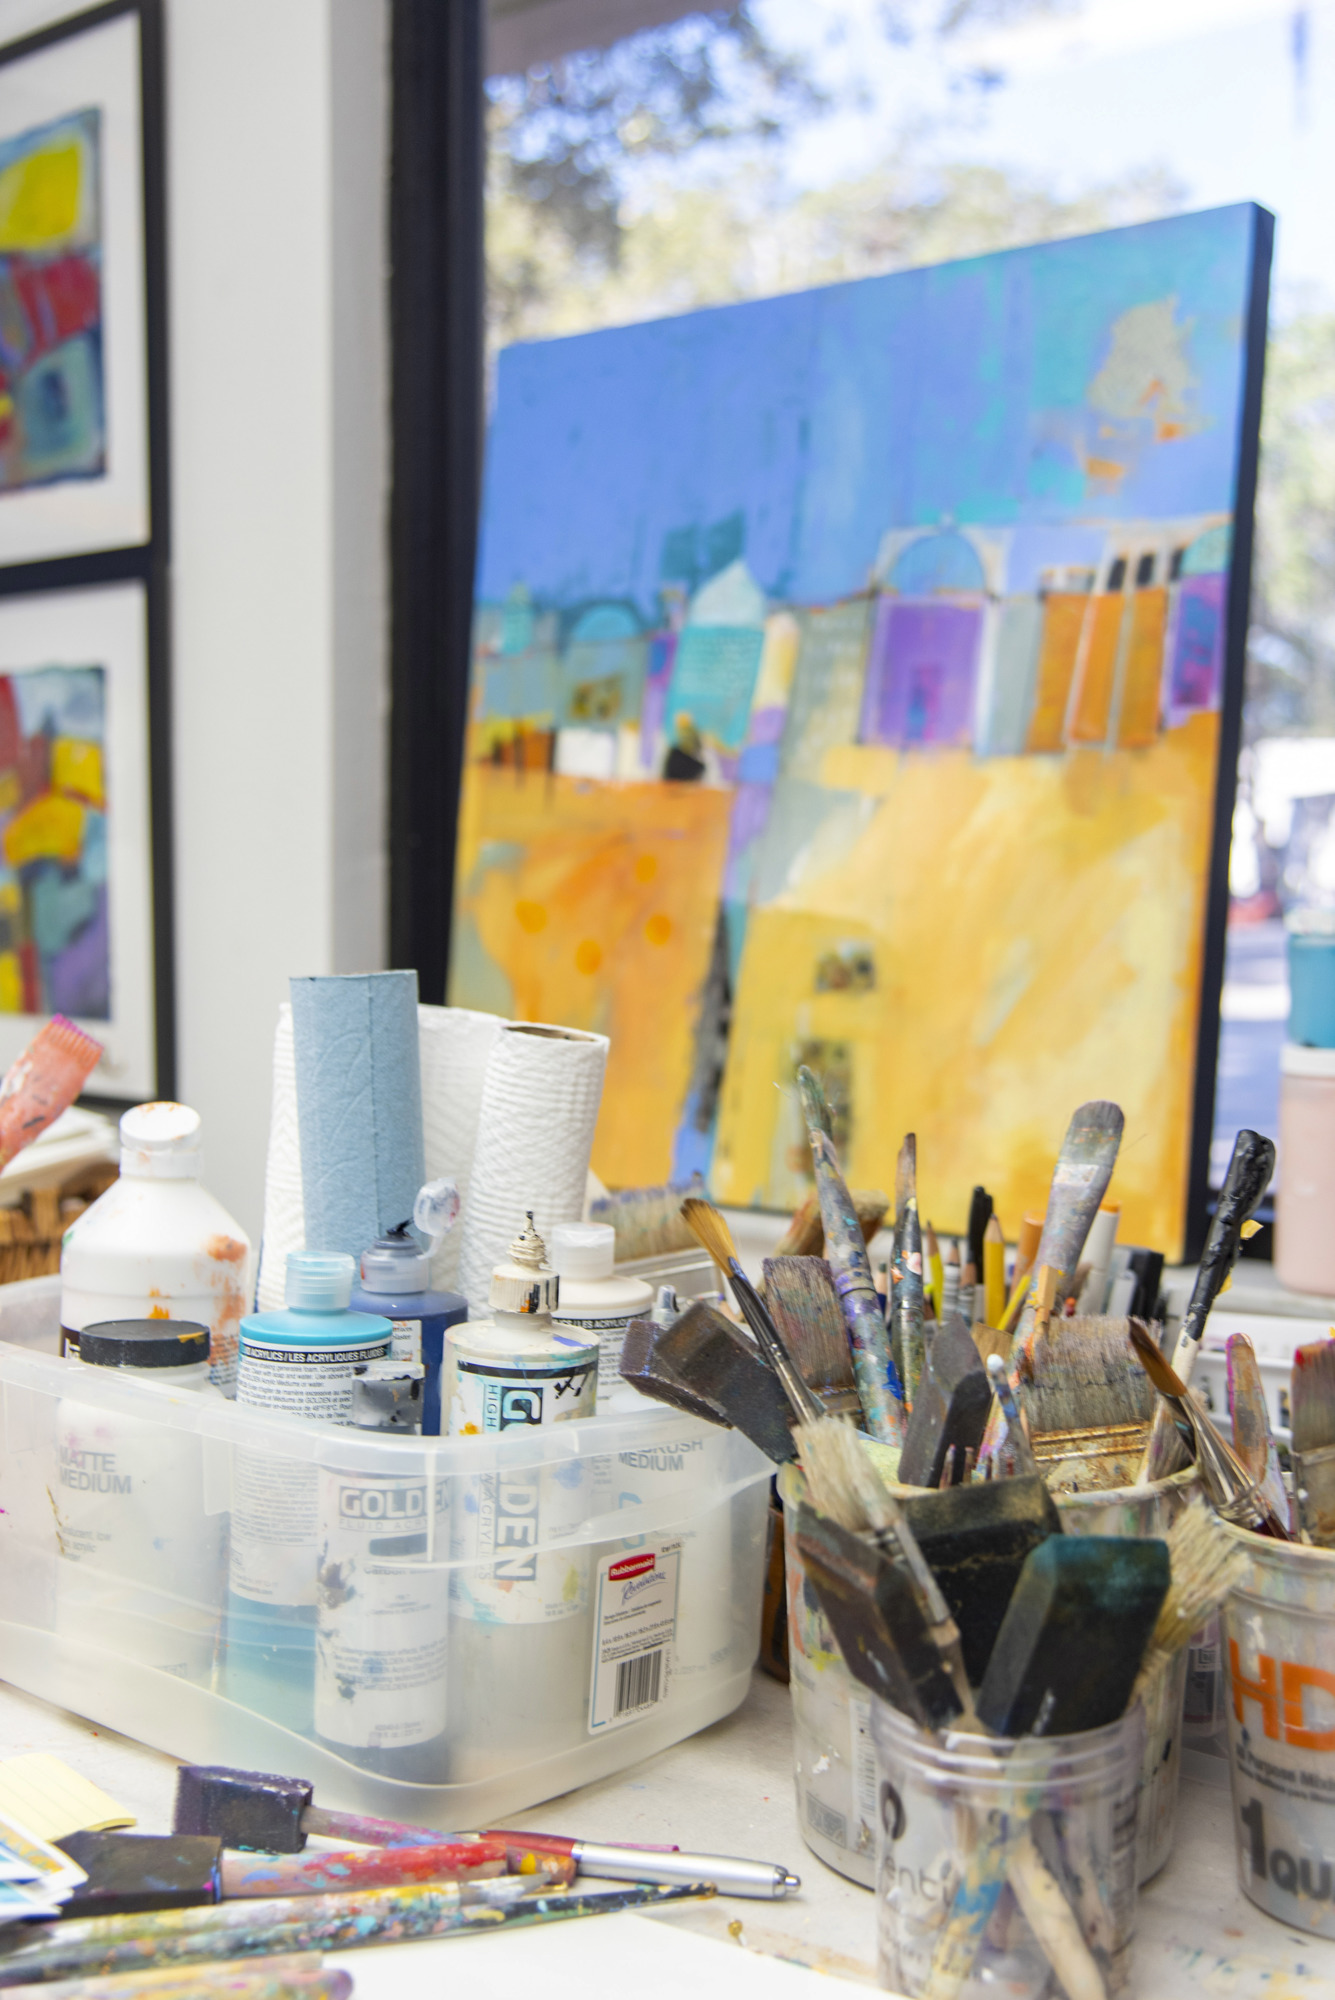 Liz Cole shares a studio with two other artists. She says that painting is vital to her life.  (Photo by Lori Sax )